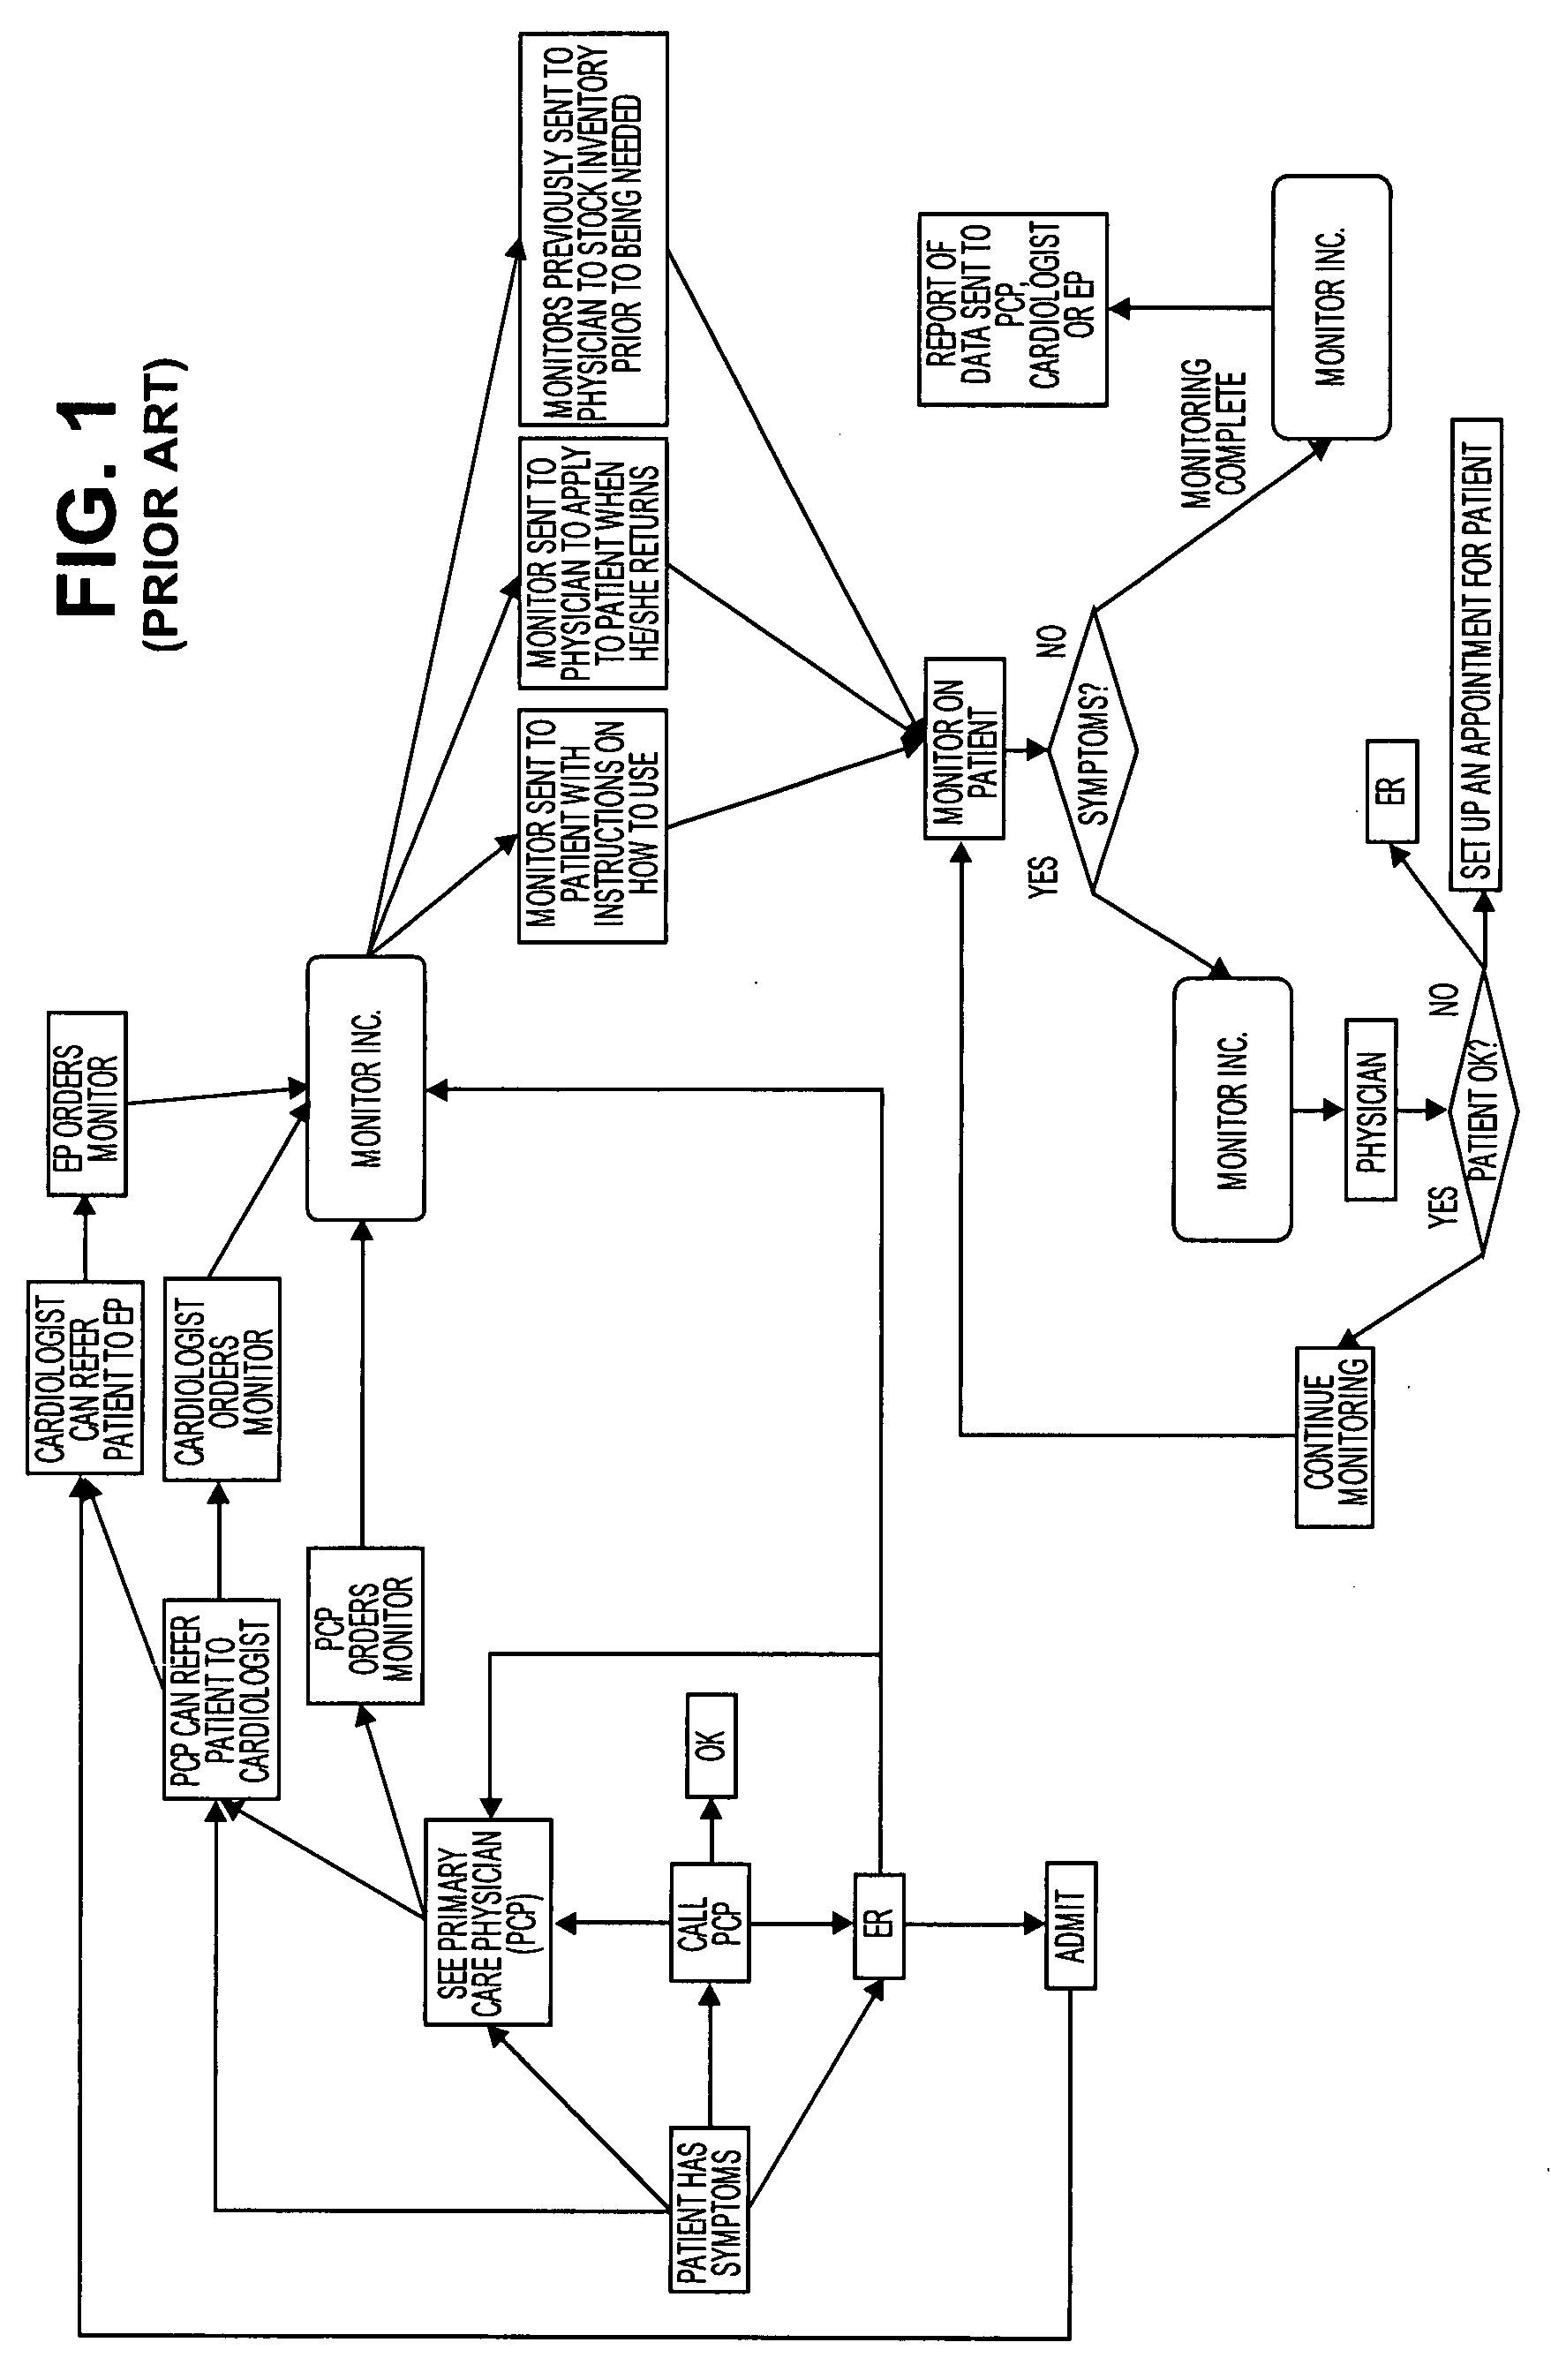 Non-invasive cardiac monitor and methods of using continuously recorded cardiac data